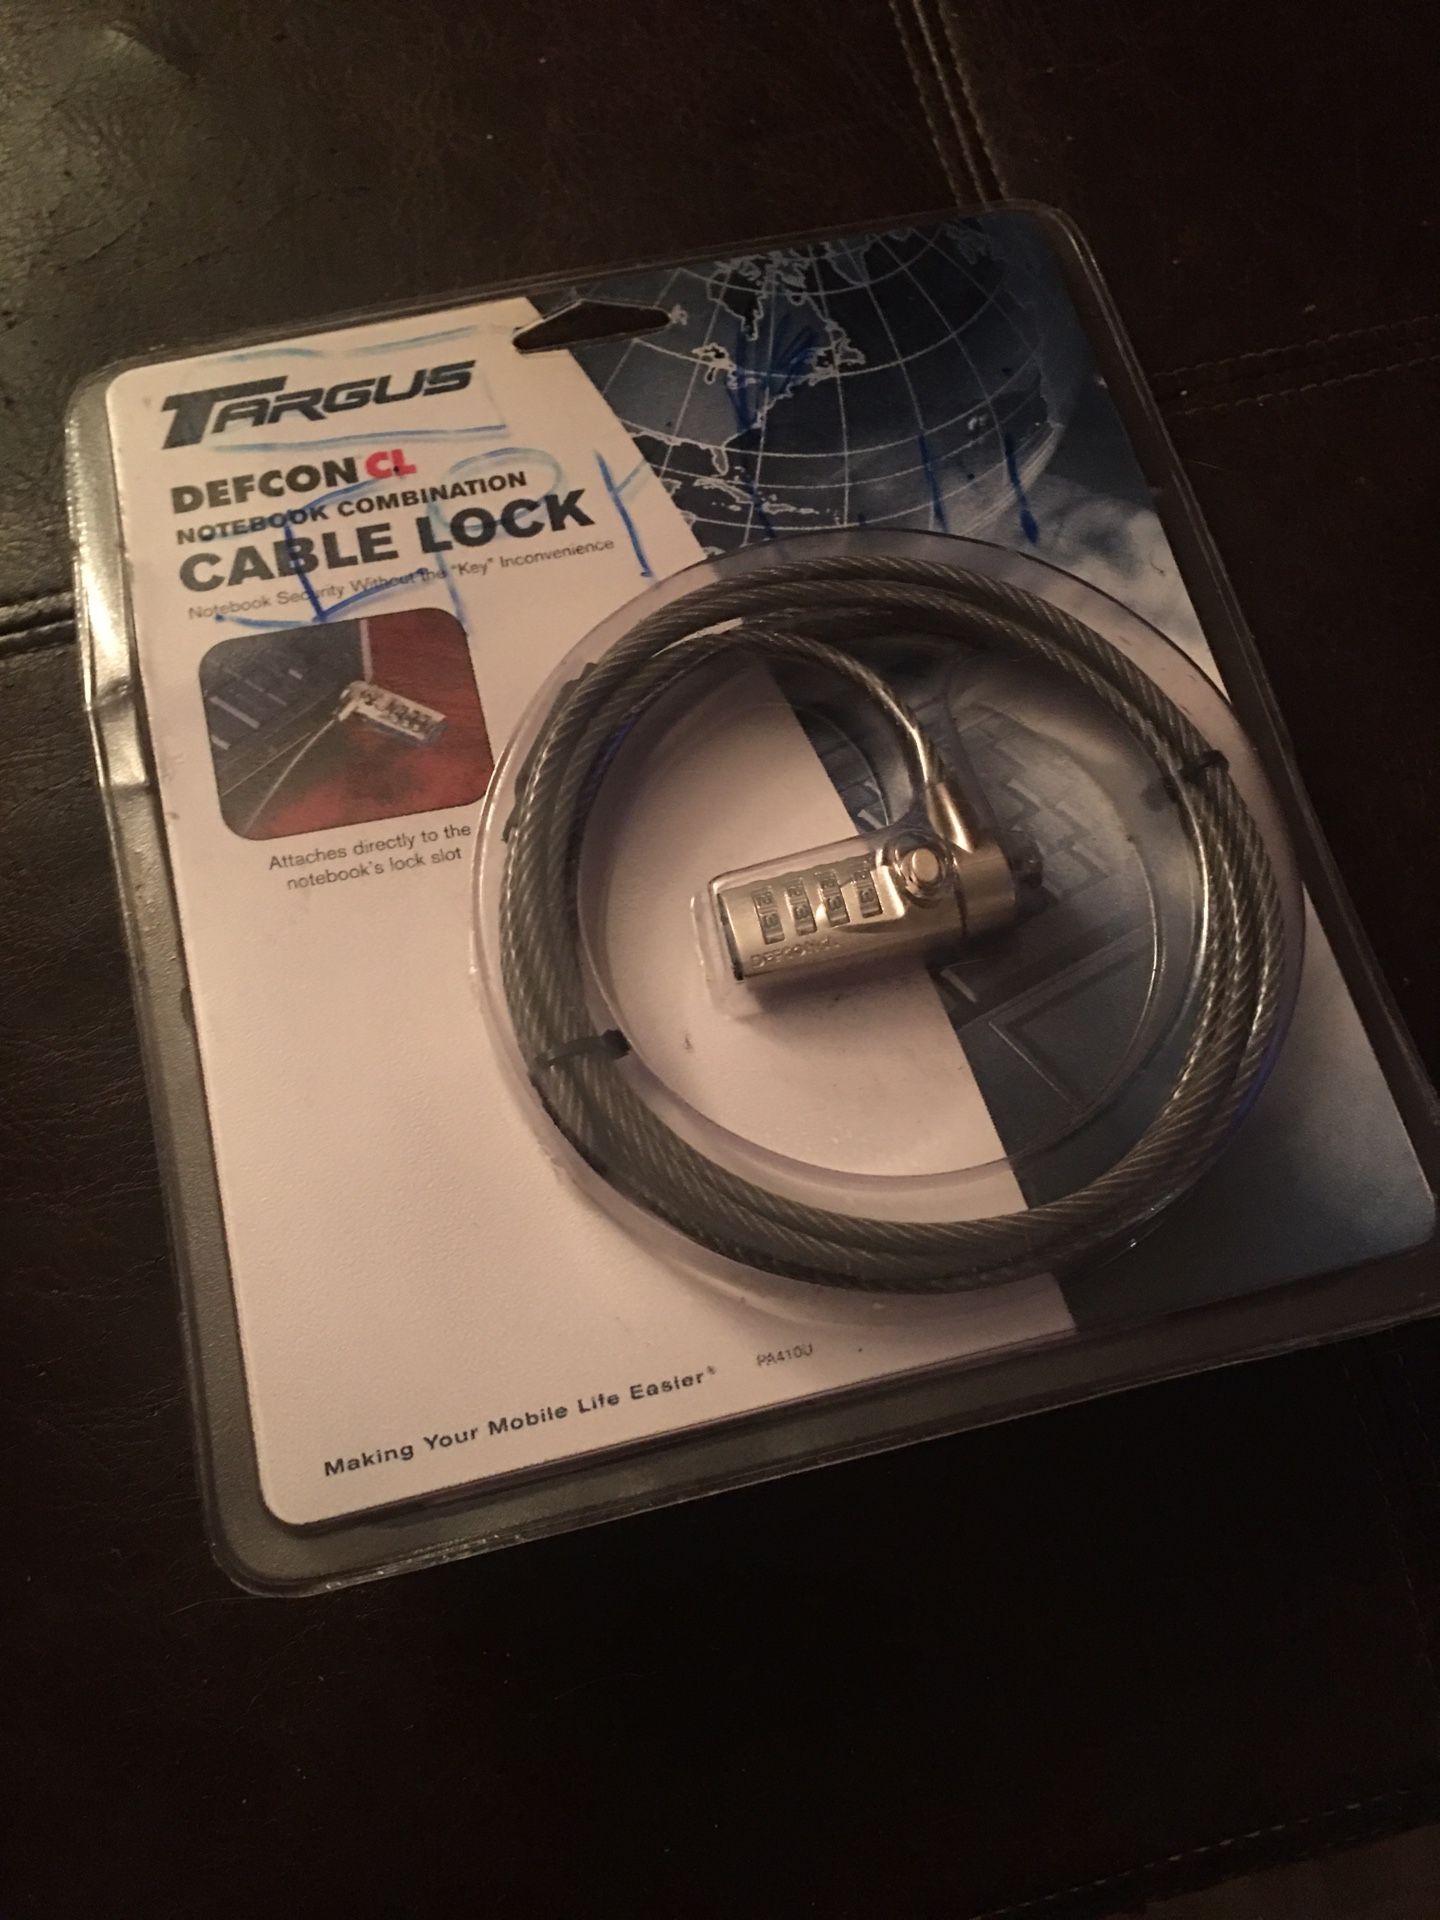 Targus Notebook Combination Cable Lock